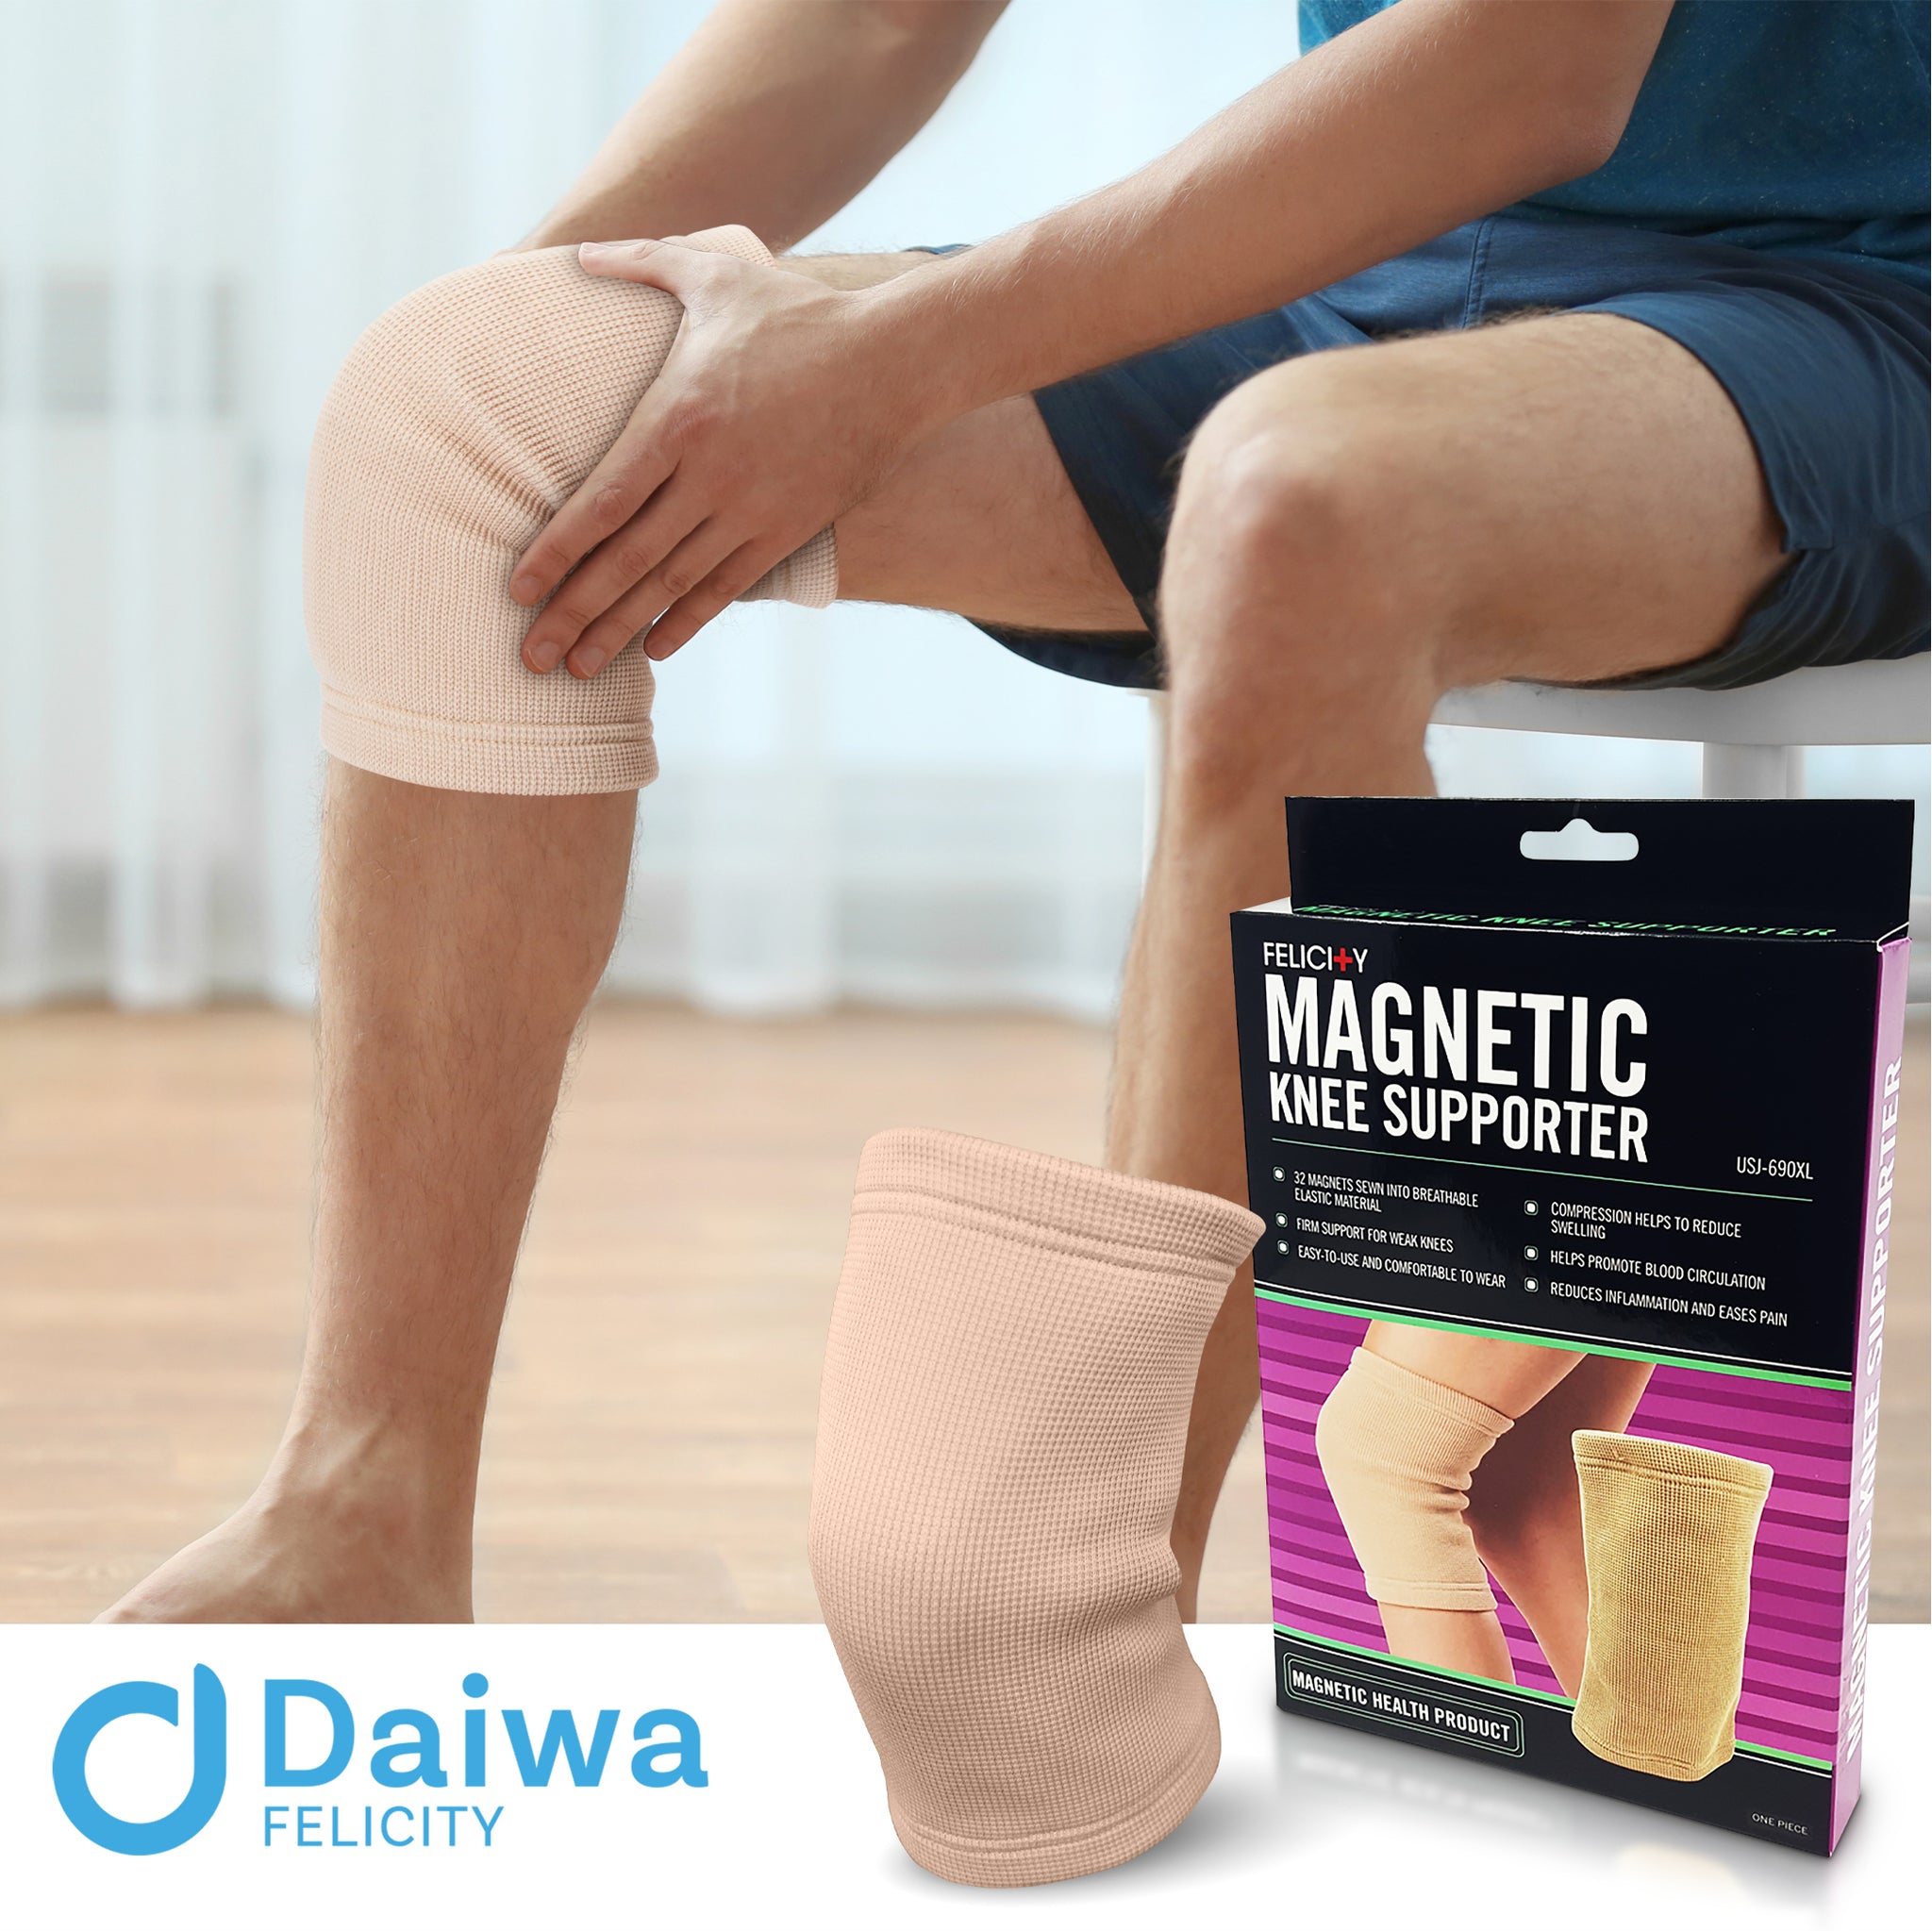 Magnetic Knee Brace USJ-690 for Arthritis Joint Pain Injury Recovery - Knee Compression Sleeve